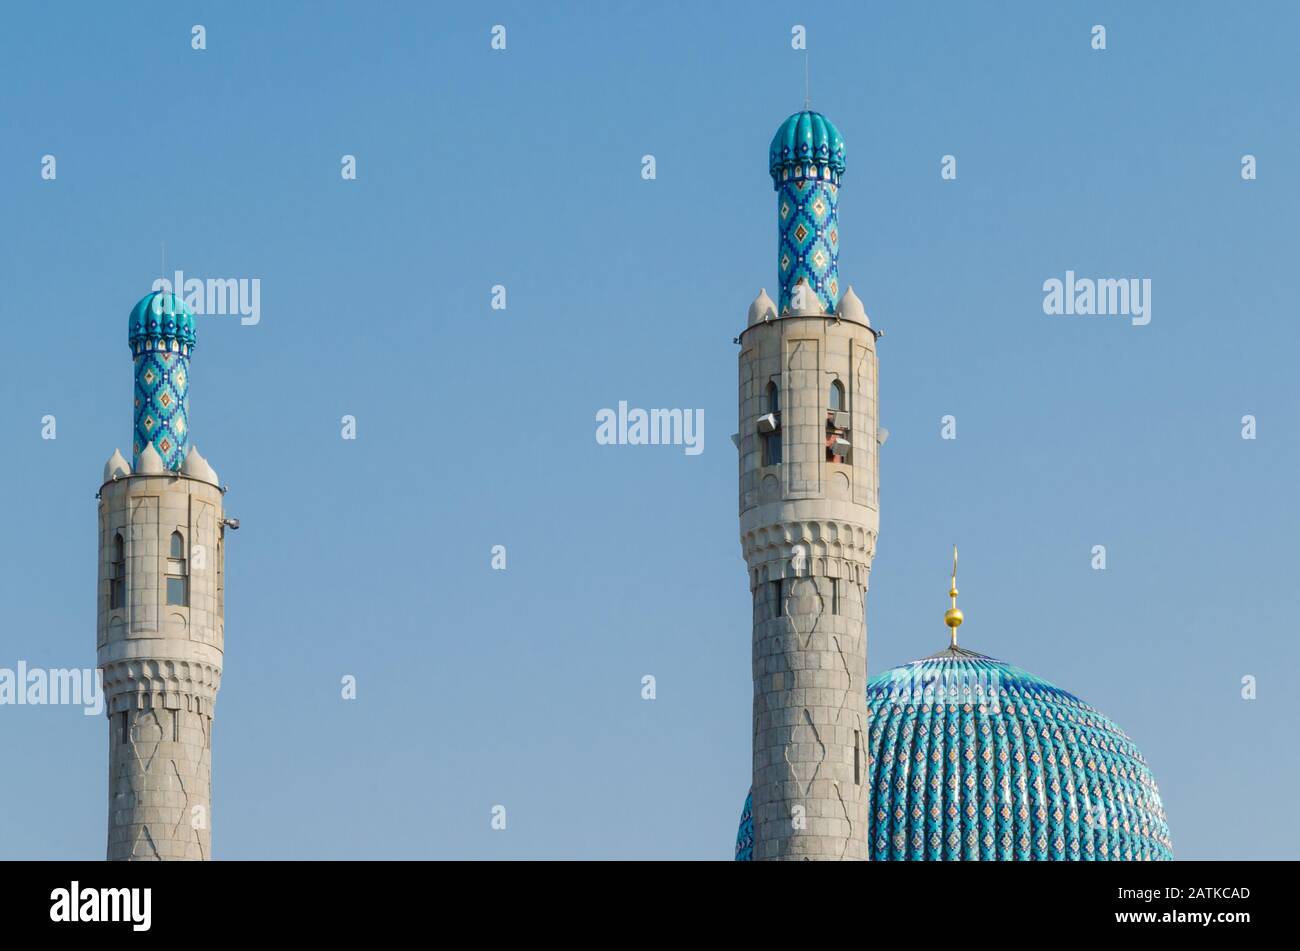 The magnificent dome and minarets of the cathedral mosque against the blue sky. Ramadan Kareem background. Stock Photo